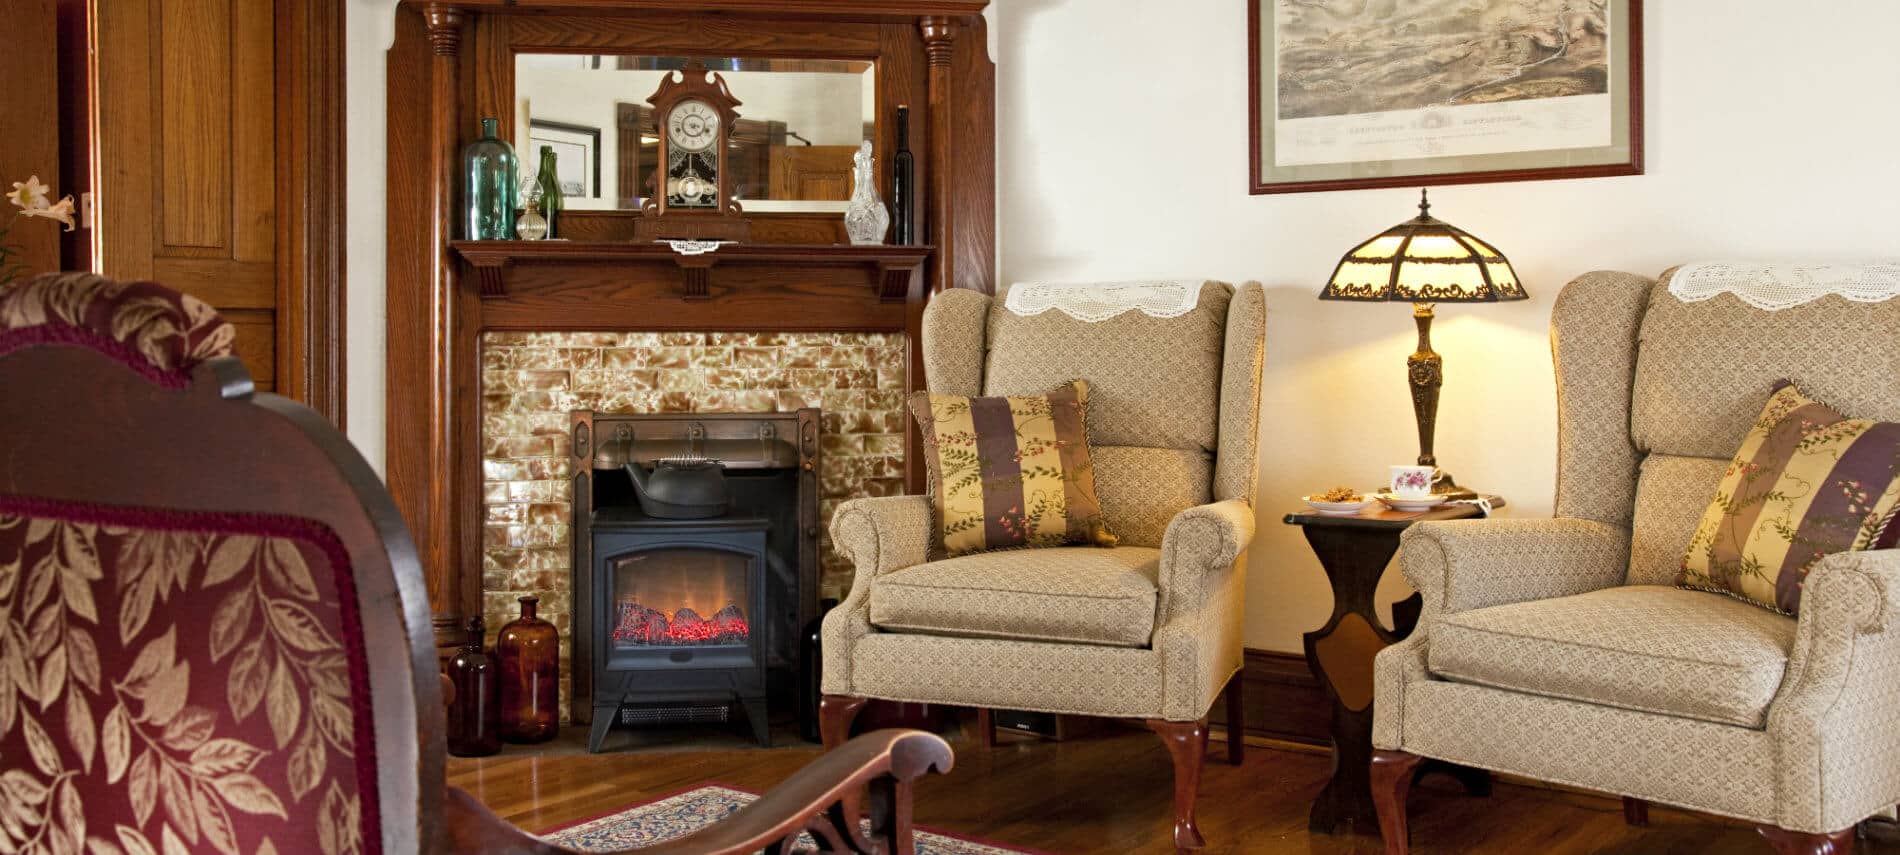 Beautiful room featuring an old fireplace with fire stove in front and two upholstered wing back chairs